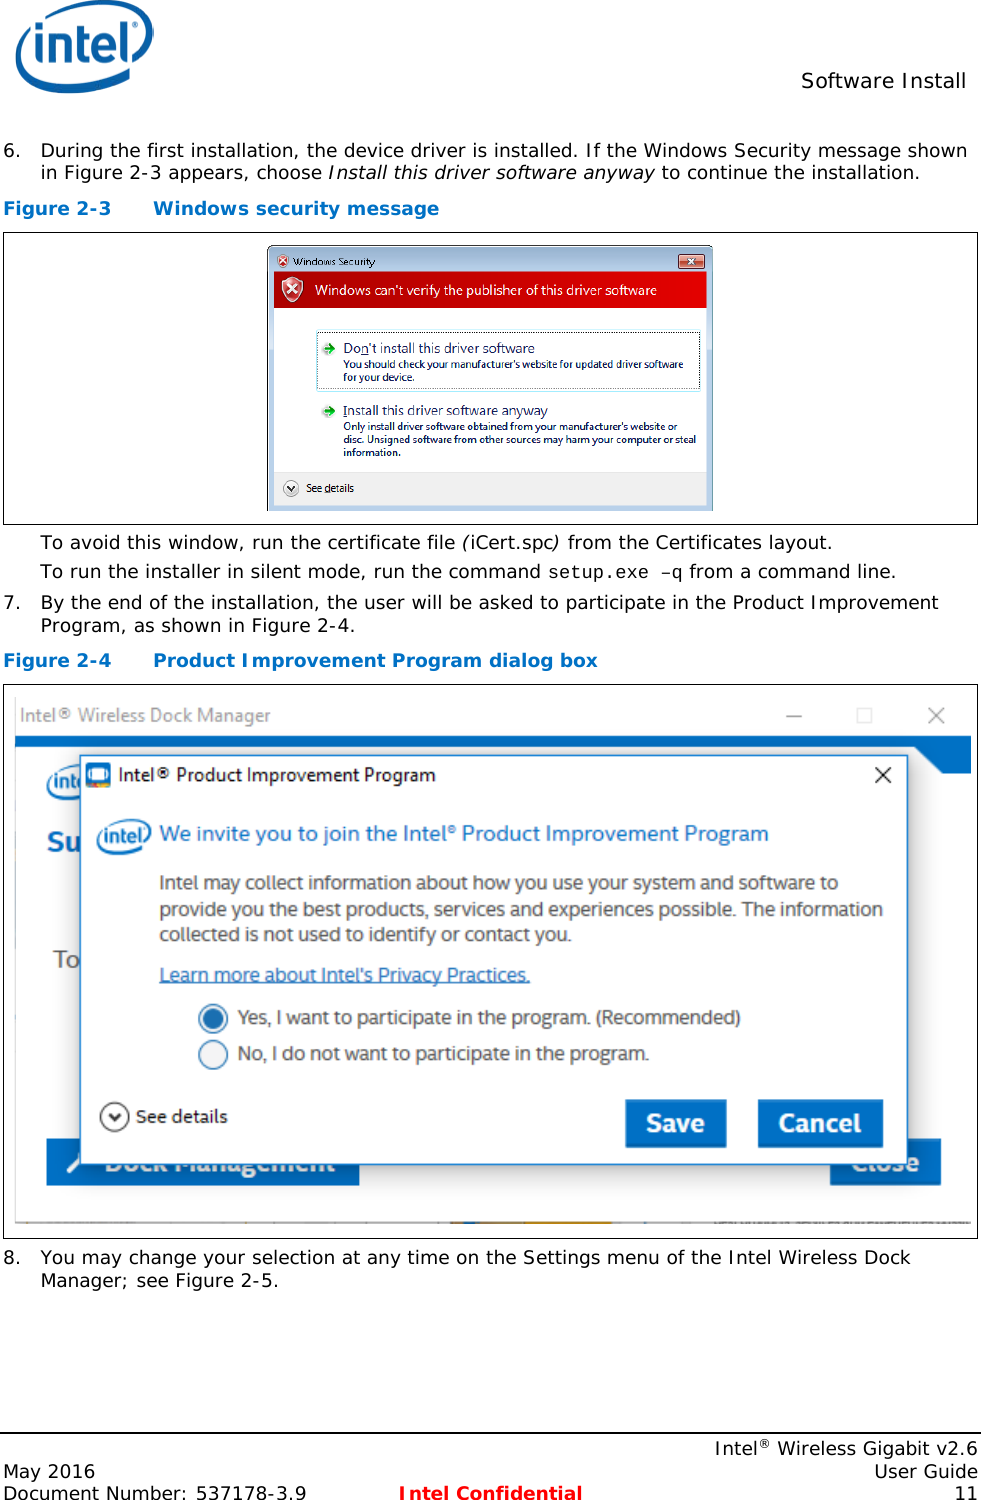  Software Install    Intel® Wireless Gigabit v2.6 May 2016    User Guide Document Number: 537178-3.9 Intel Confidential 11 6. During the first installation, the device driver is installed. If the Windows Security message shown in Figure 2-3 appears, choose Install this driver software anyway to continue the installation. Figure 2-3  Windows security message  To avoid this window, run the certificate file (iCert.spc) from the Certificates layout. To run the installer in silent mode, run the command setup.exe –q from a command line. 7. By the end of the installation, the user will be asked to participate in the Product Improvement Program, as shown in Figure 2-4. Figure 2-4  Product Improvement Program dialog box  8. You may change your selection at any time on the Settings menu of the Intel Wireless Dock Manager; see Figure 2-5. 